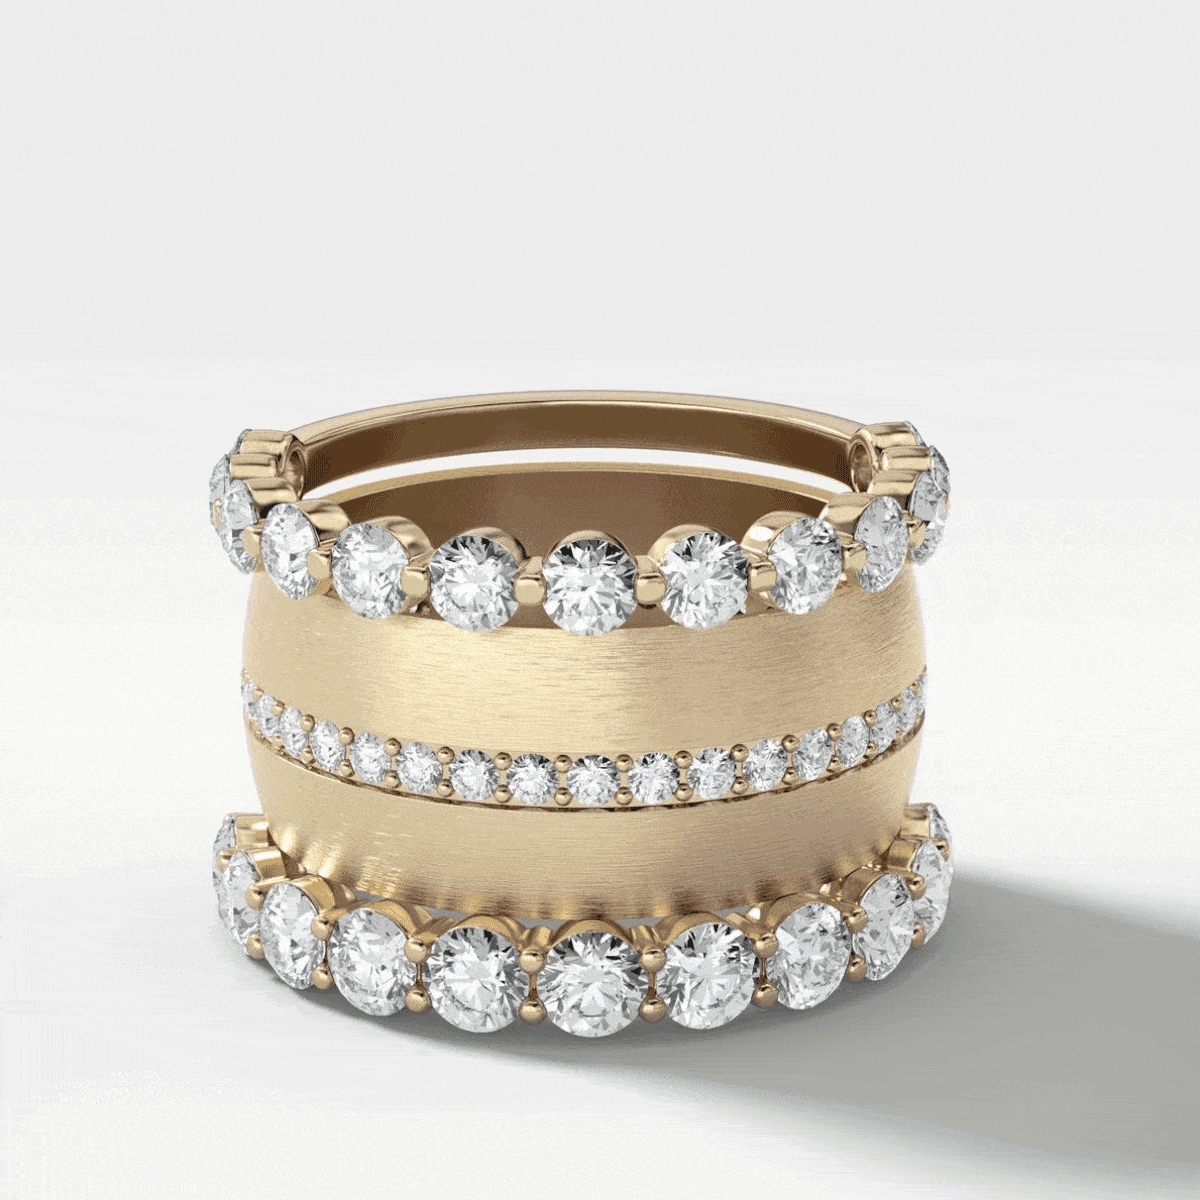 Good Stack no. 5 by Good Stone available in Gold and Platinum and Good Stacks Sets